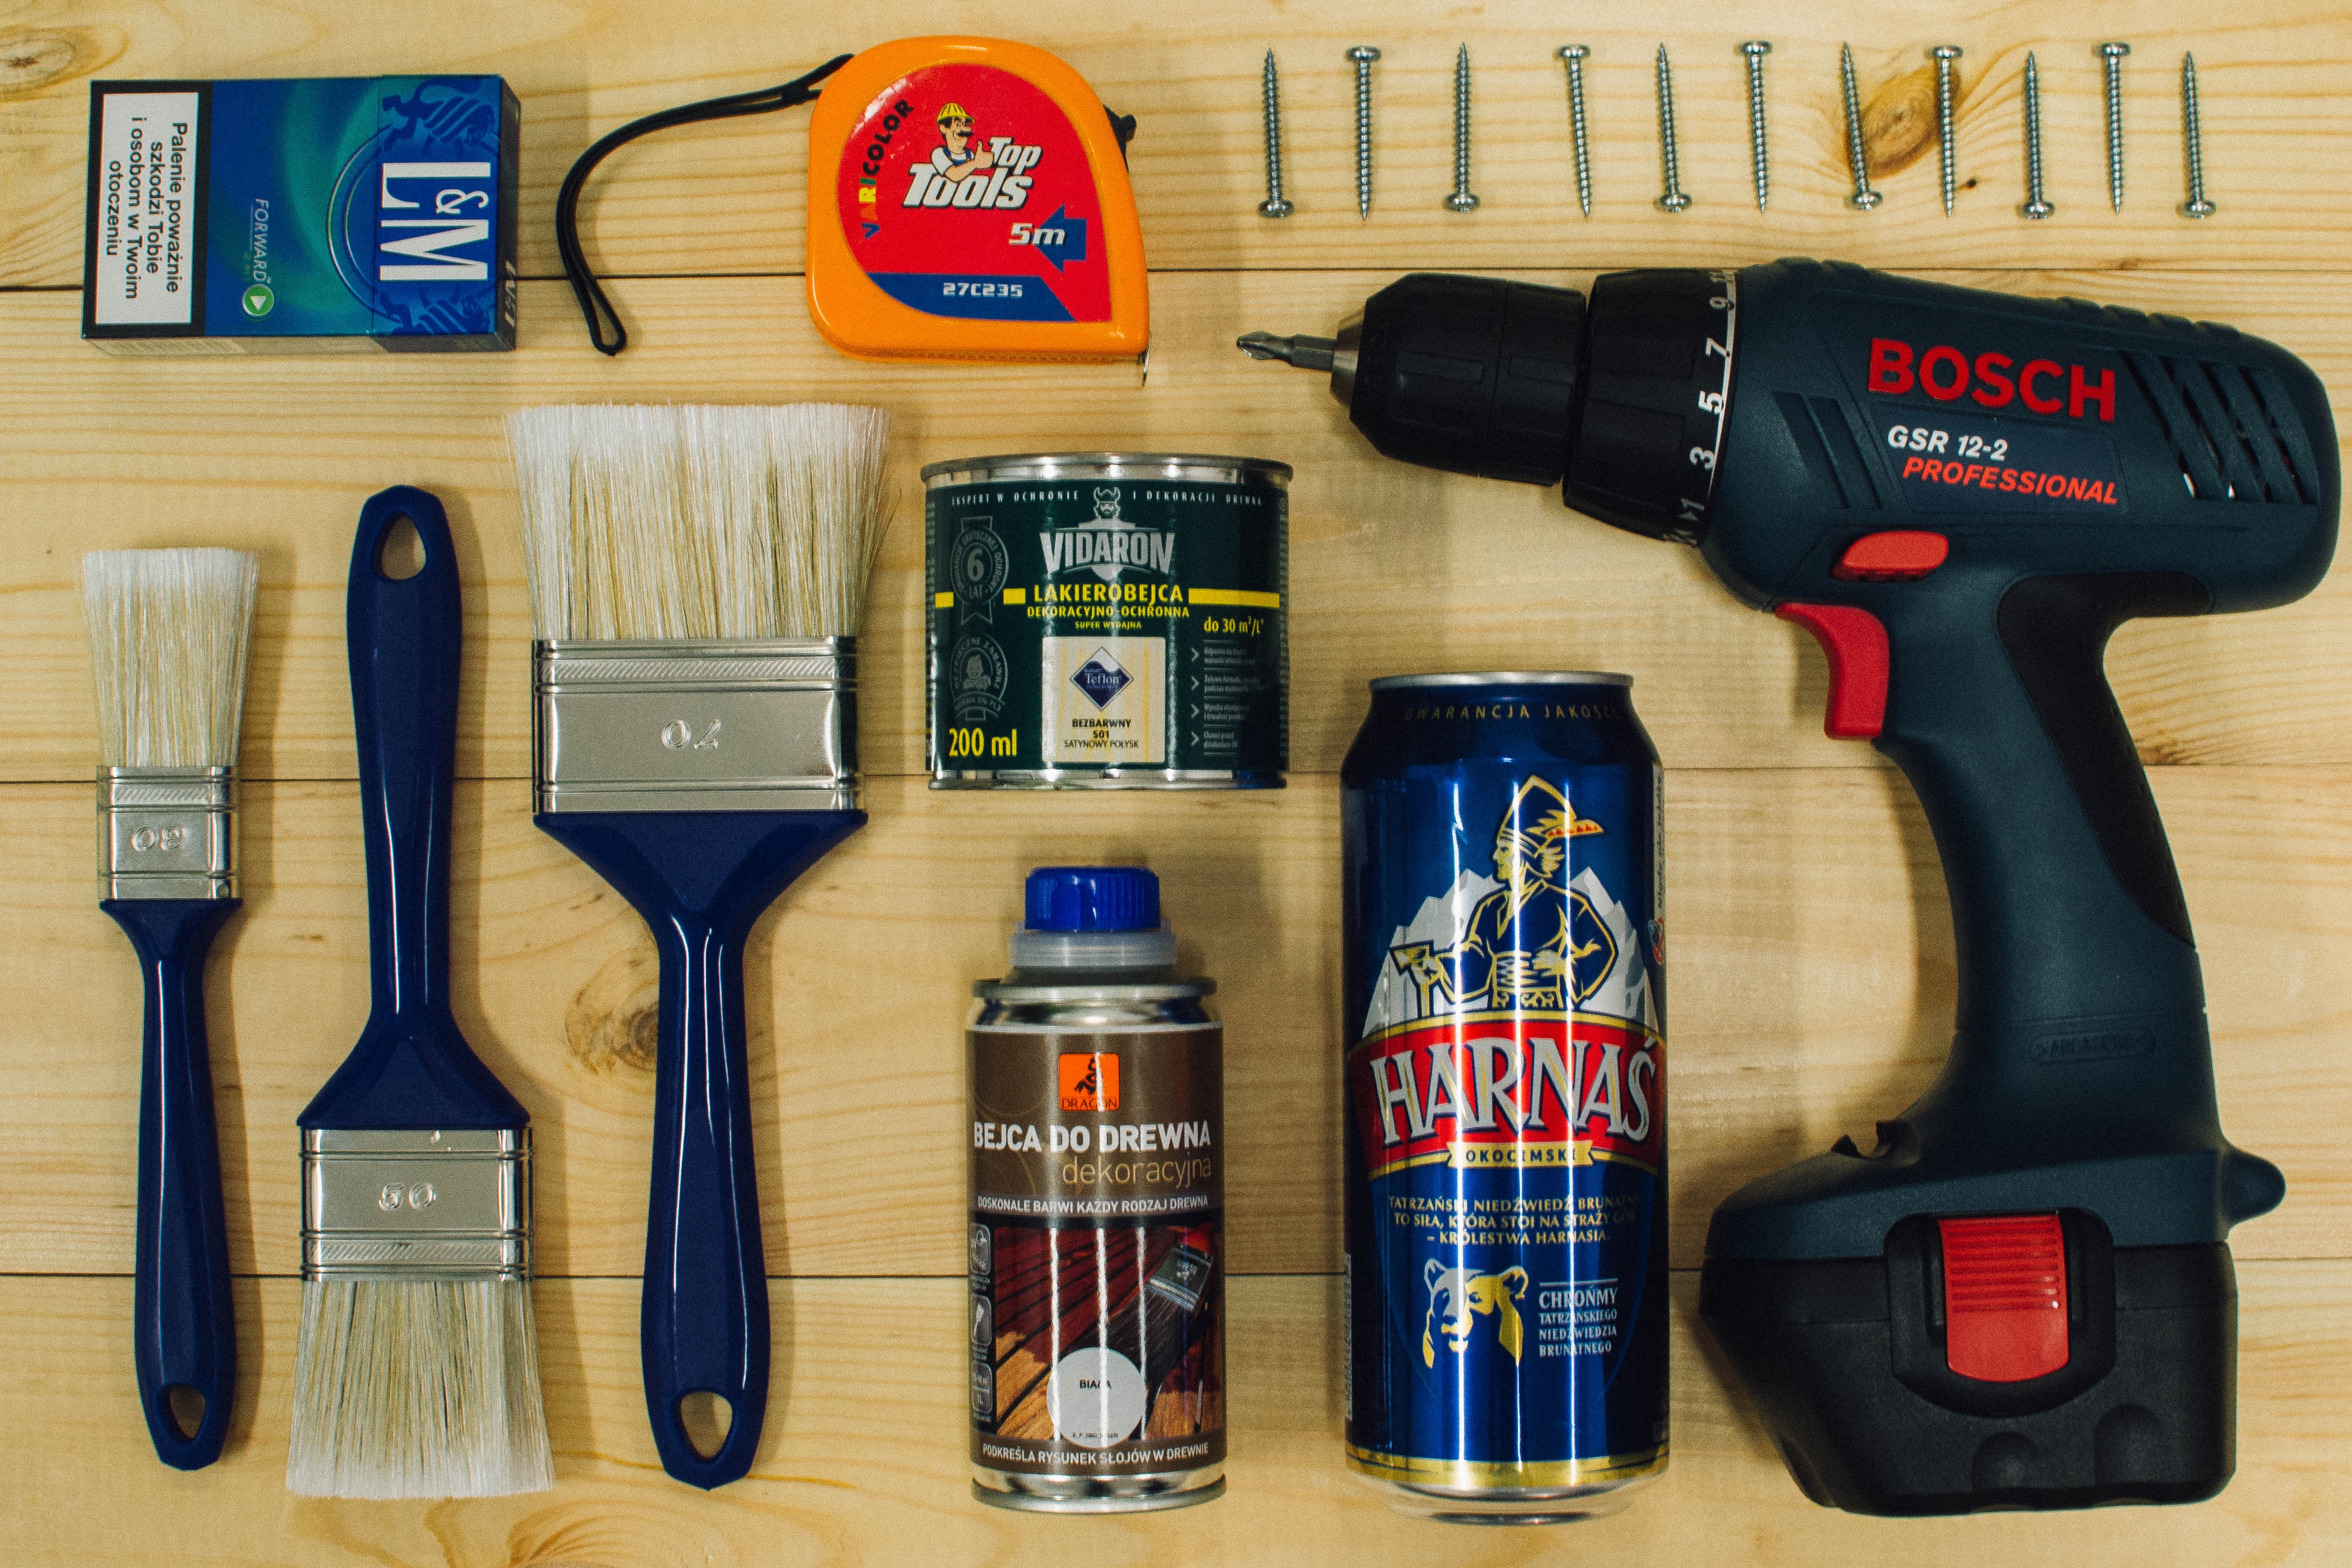 How to finish every DIY project you start